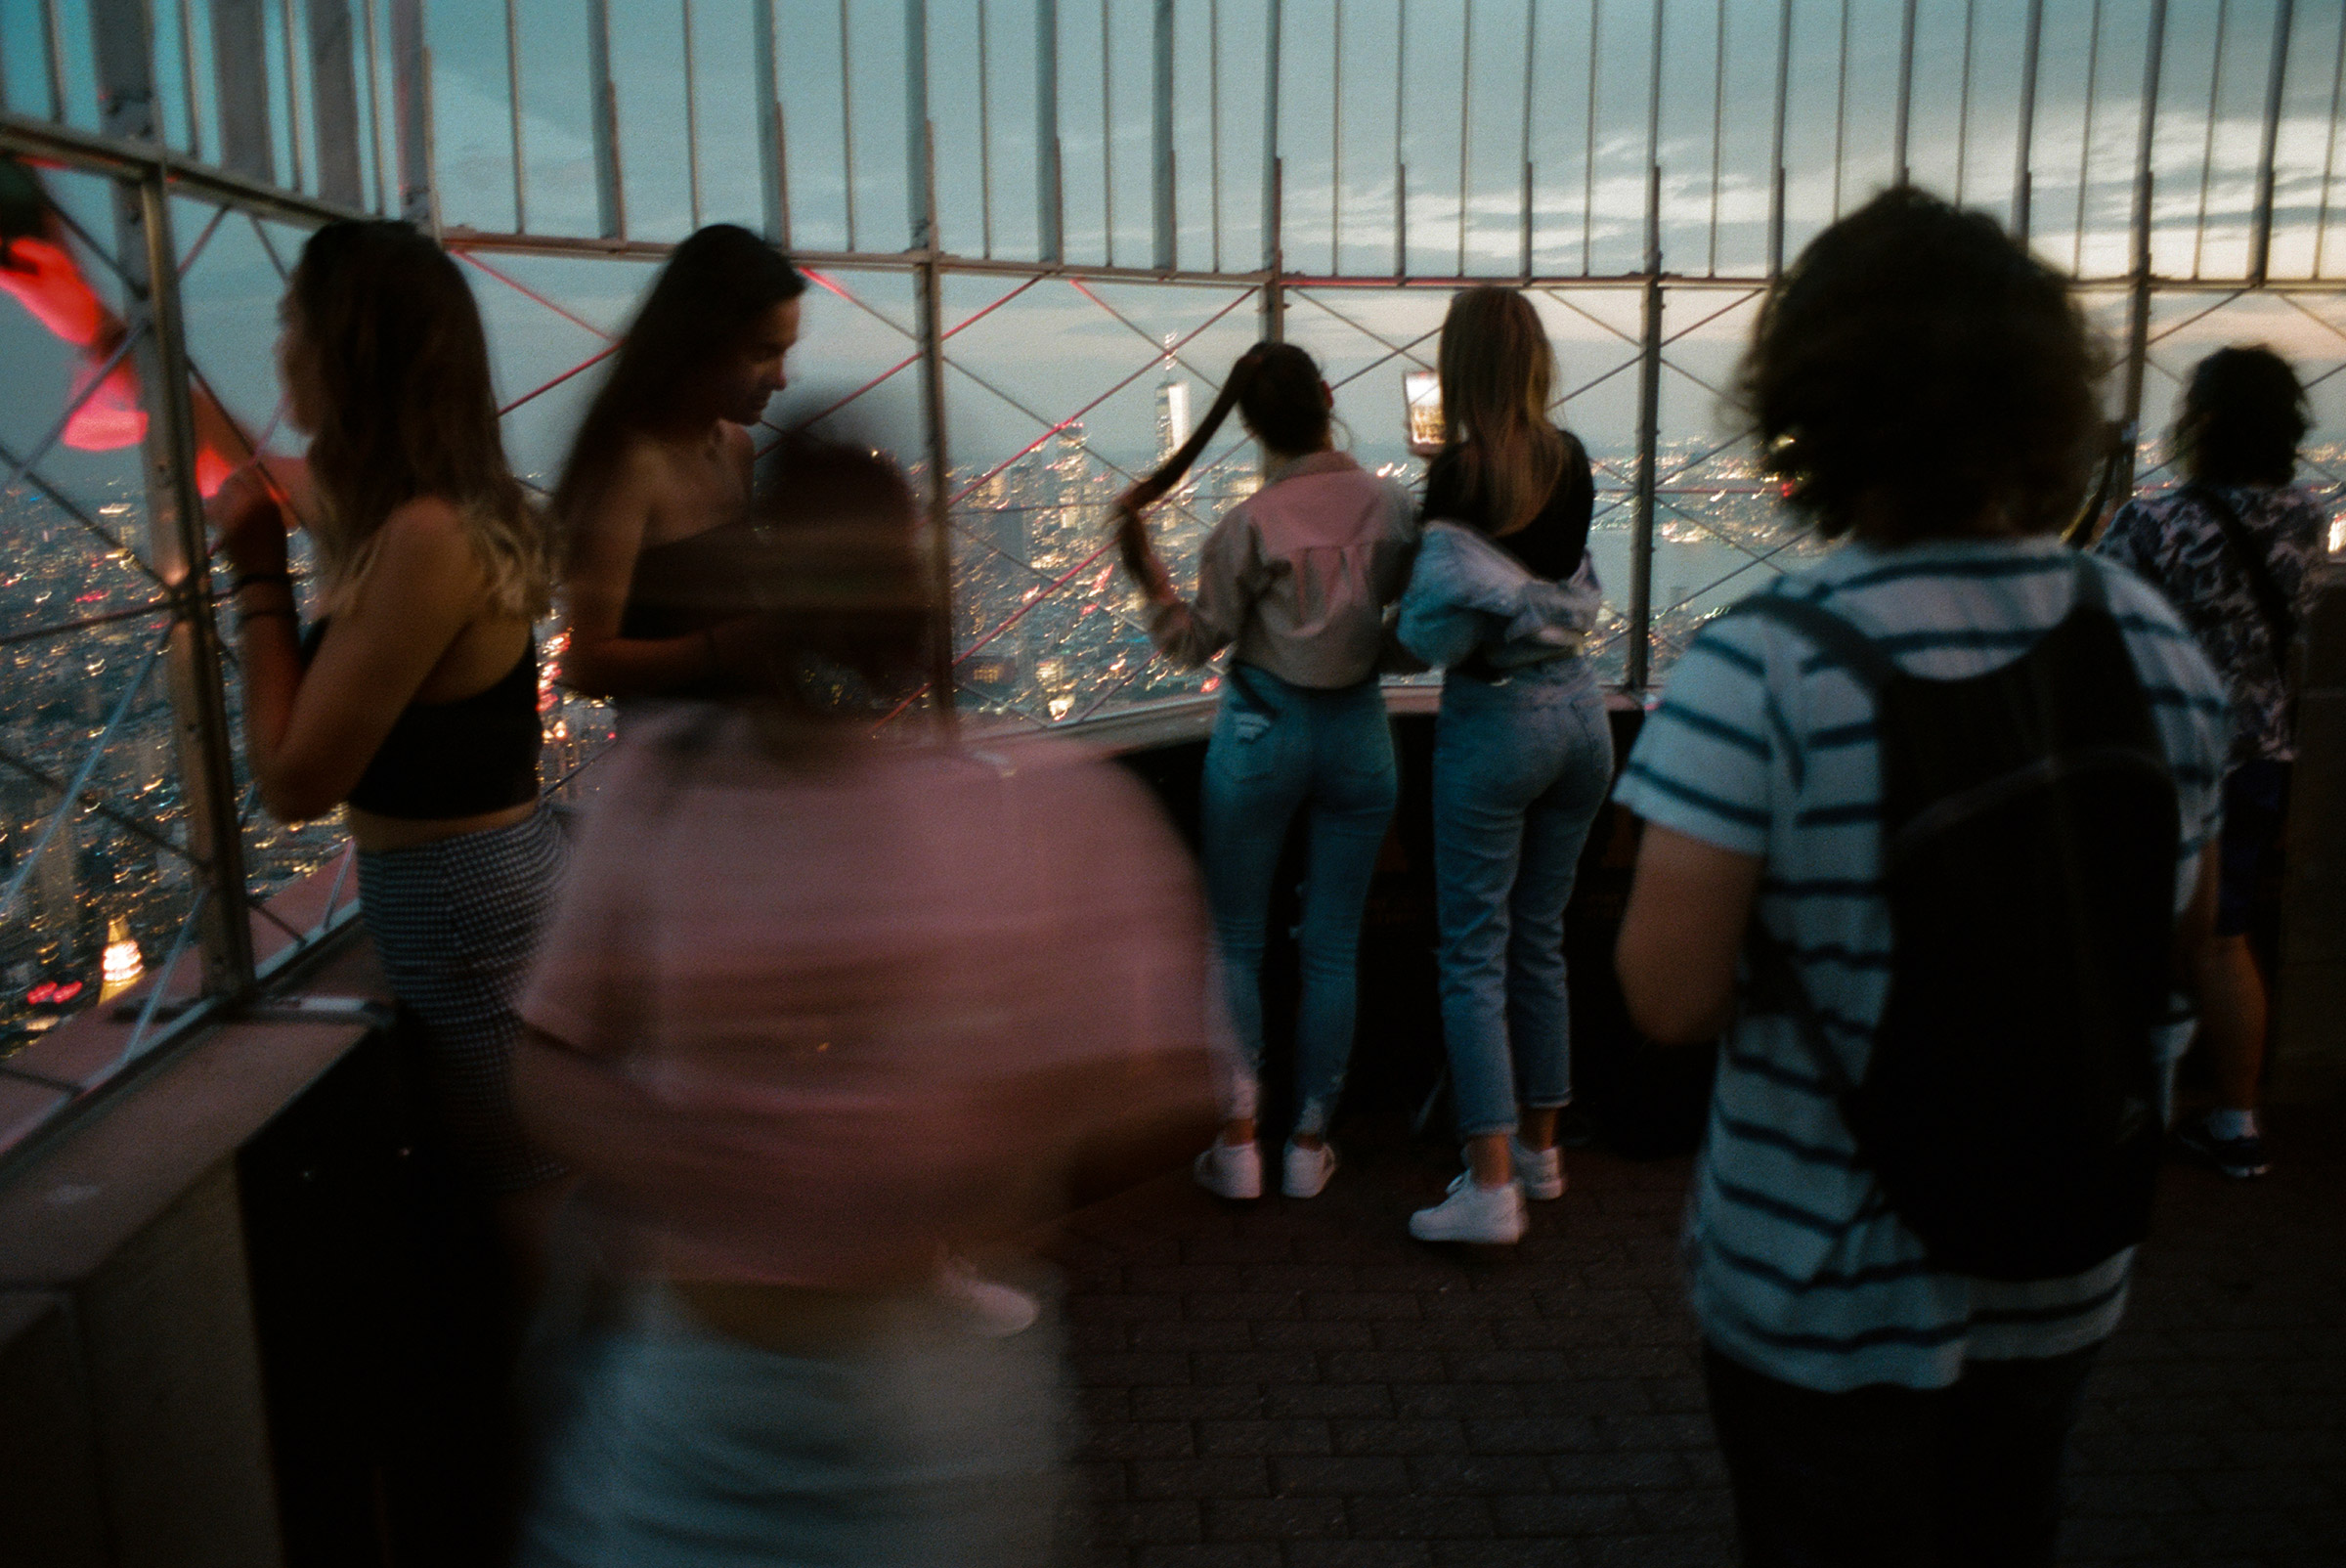 A group of young tourists at the Empire State Building observation deck gasp at the sight of the city from above, Sept. 1, 2021. (Daniel Arnold for TIME)